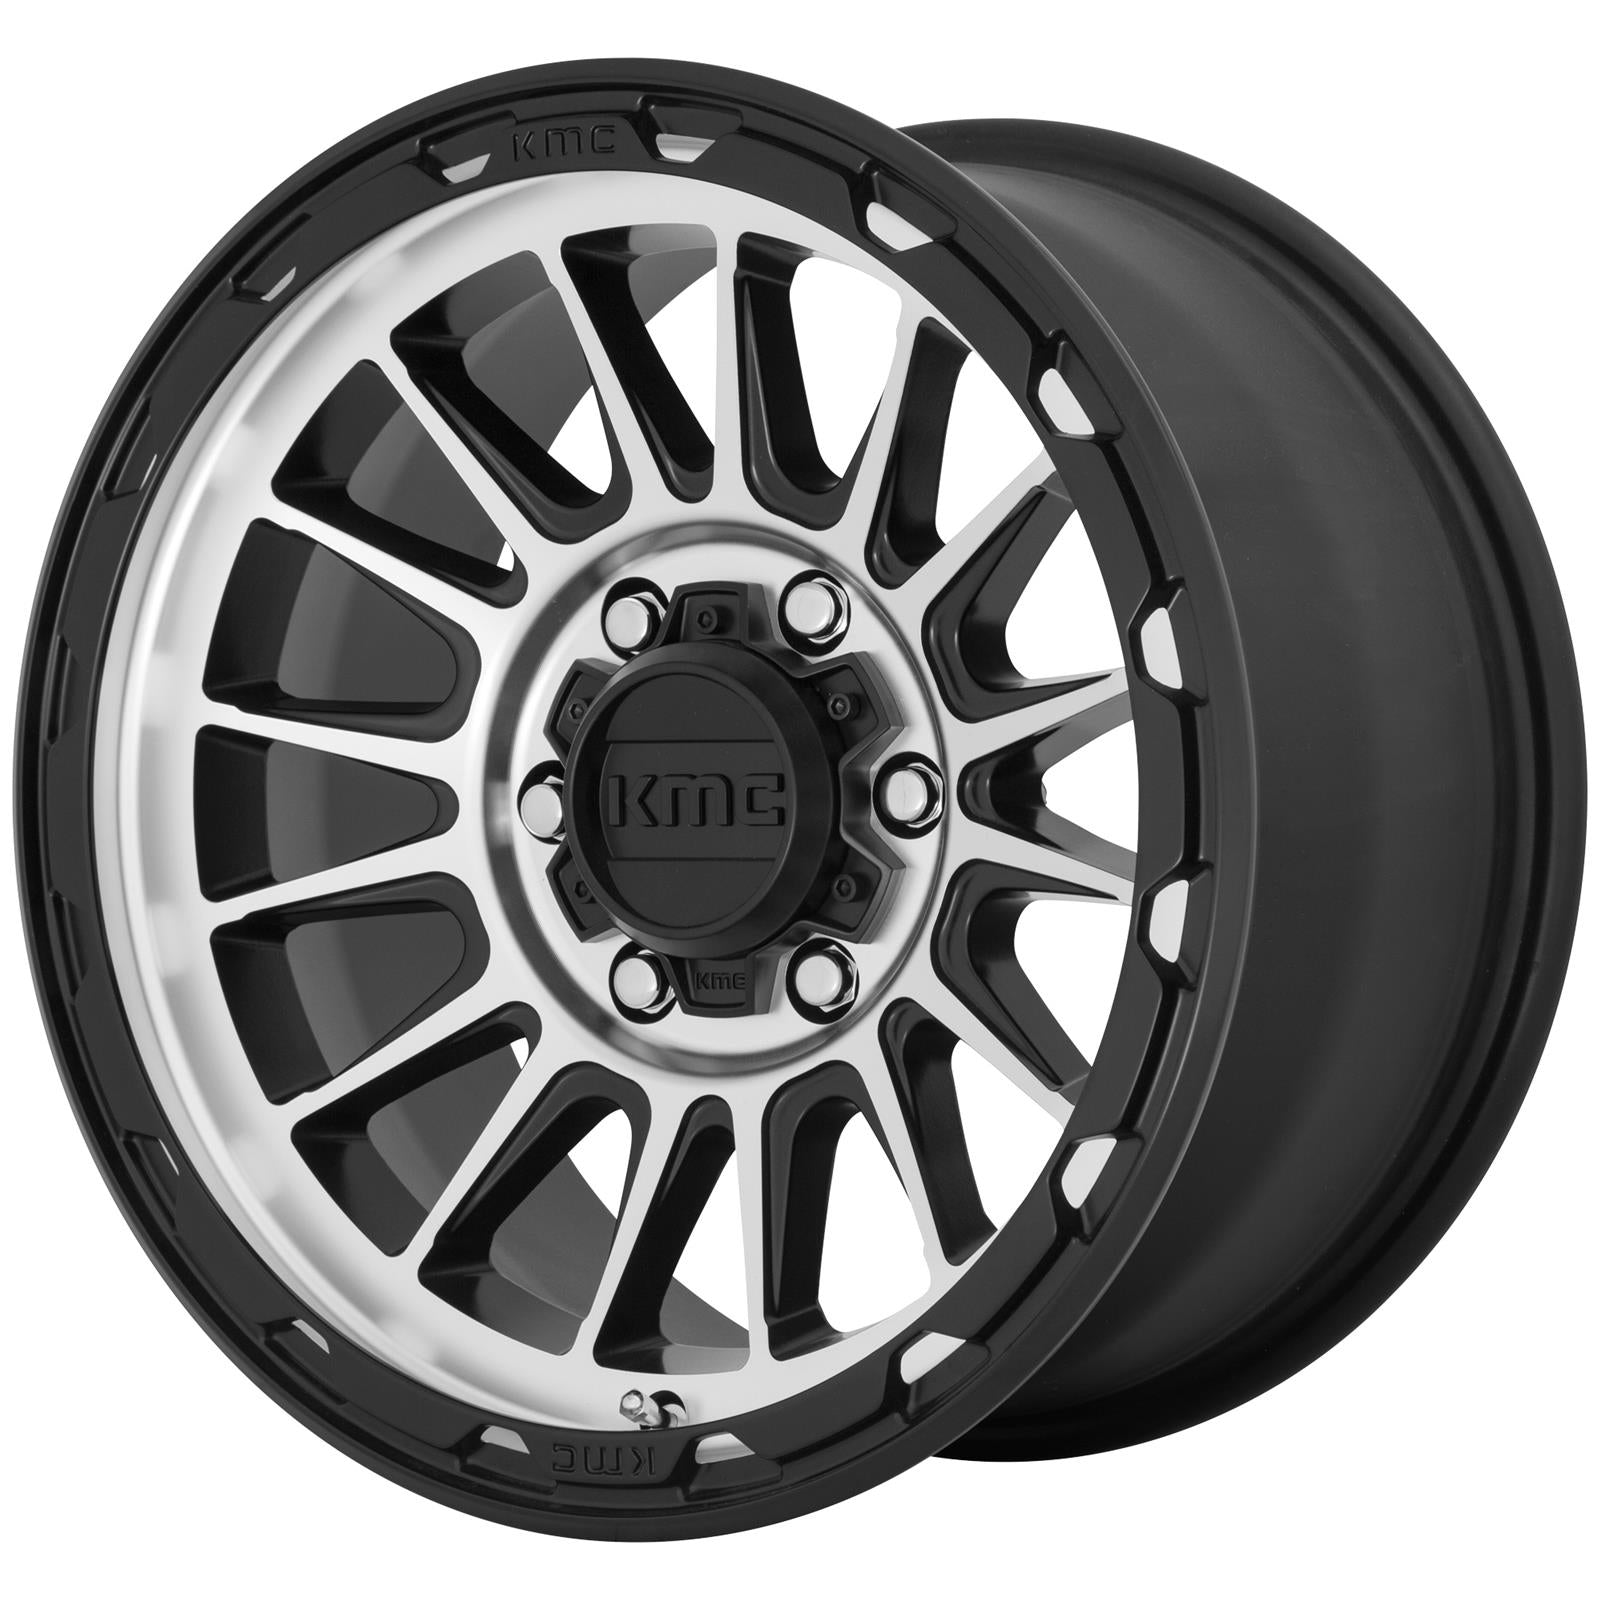 KMC KM542 Impact Series Satin Black Wheels with Machined Face